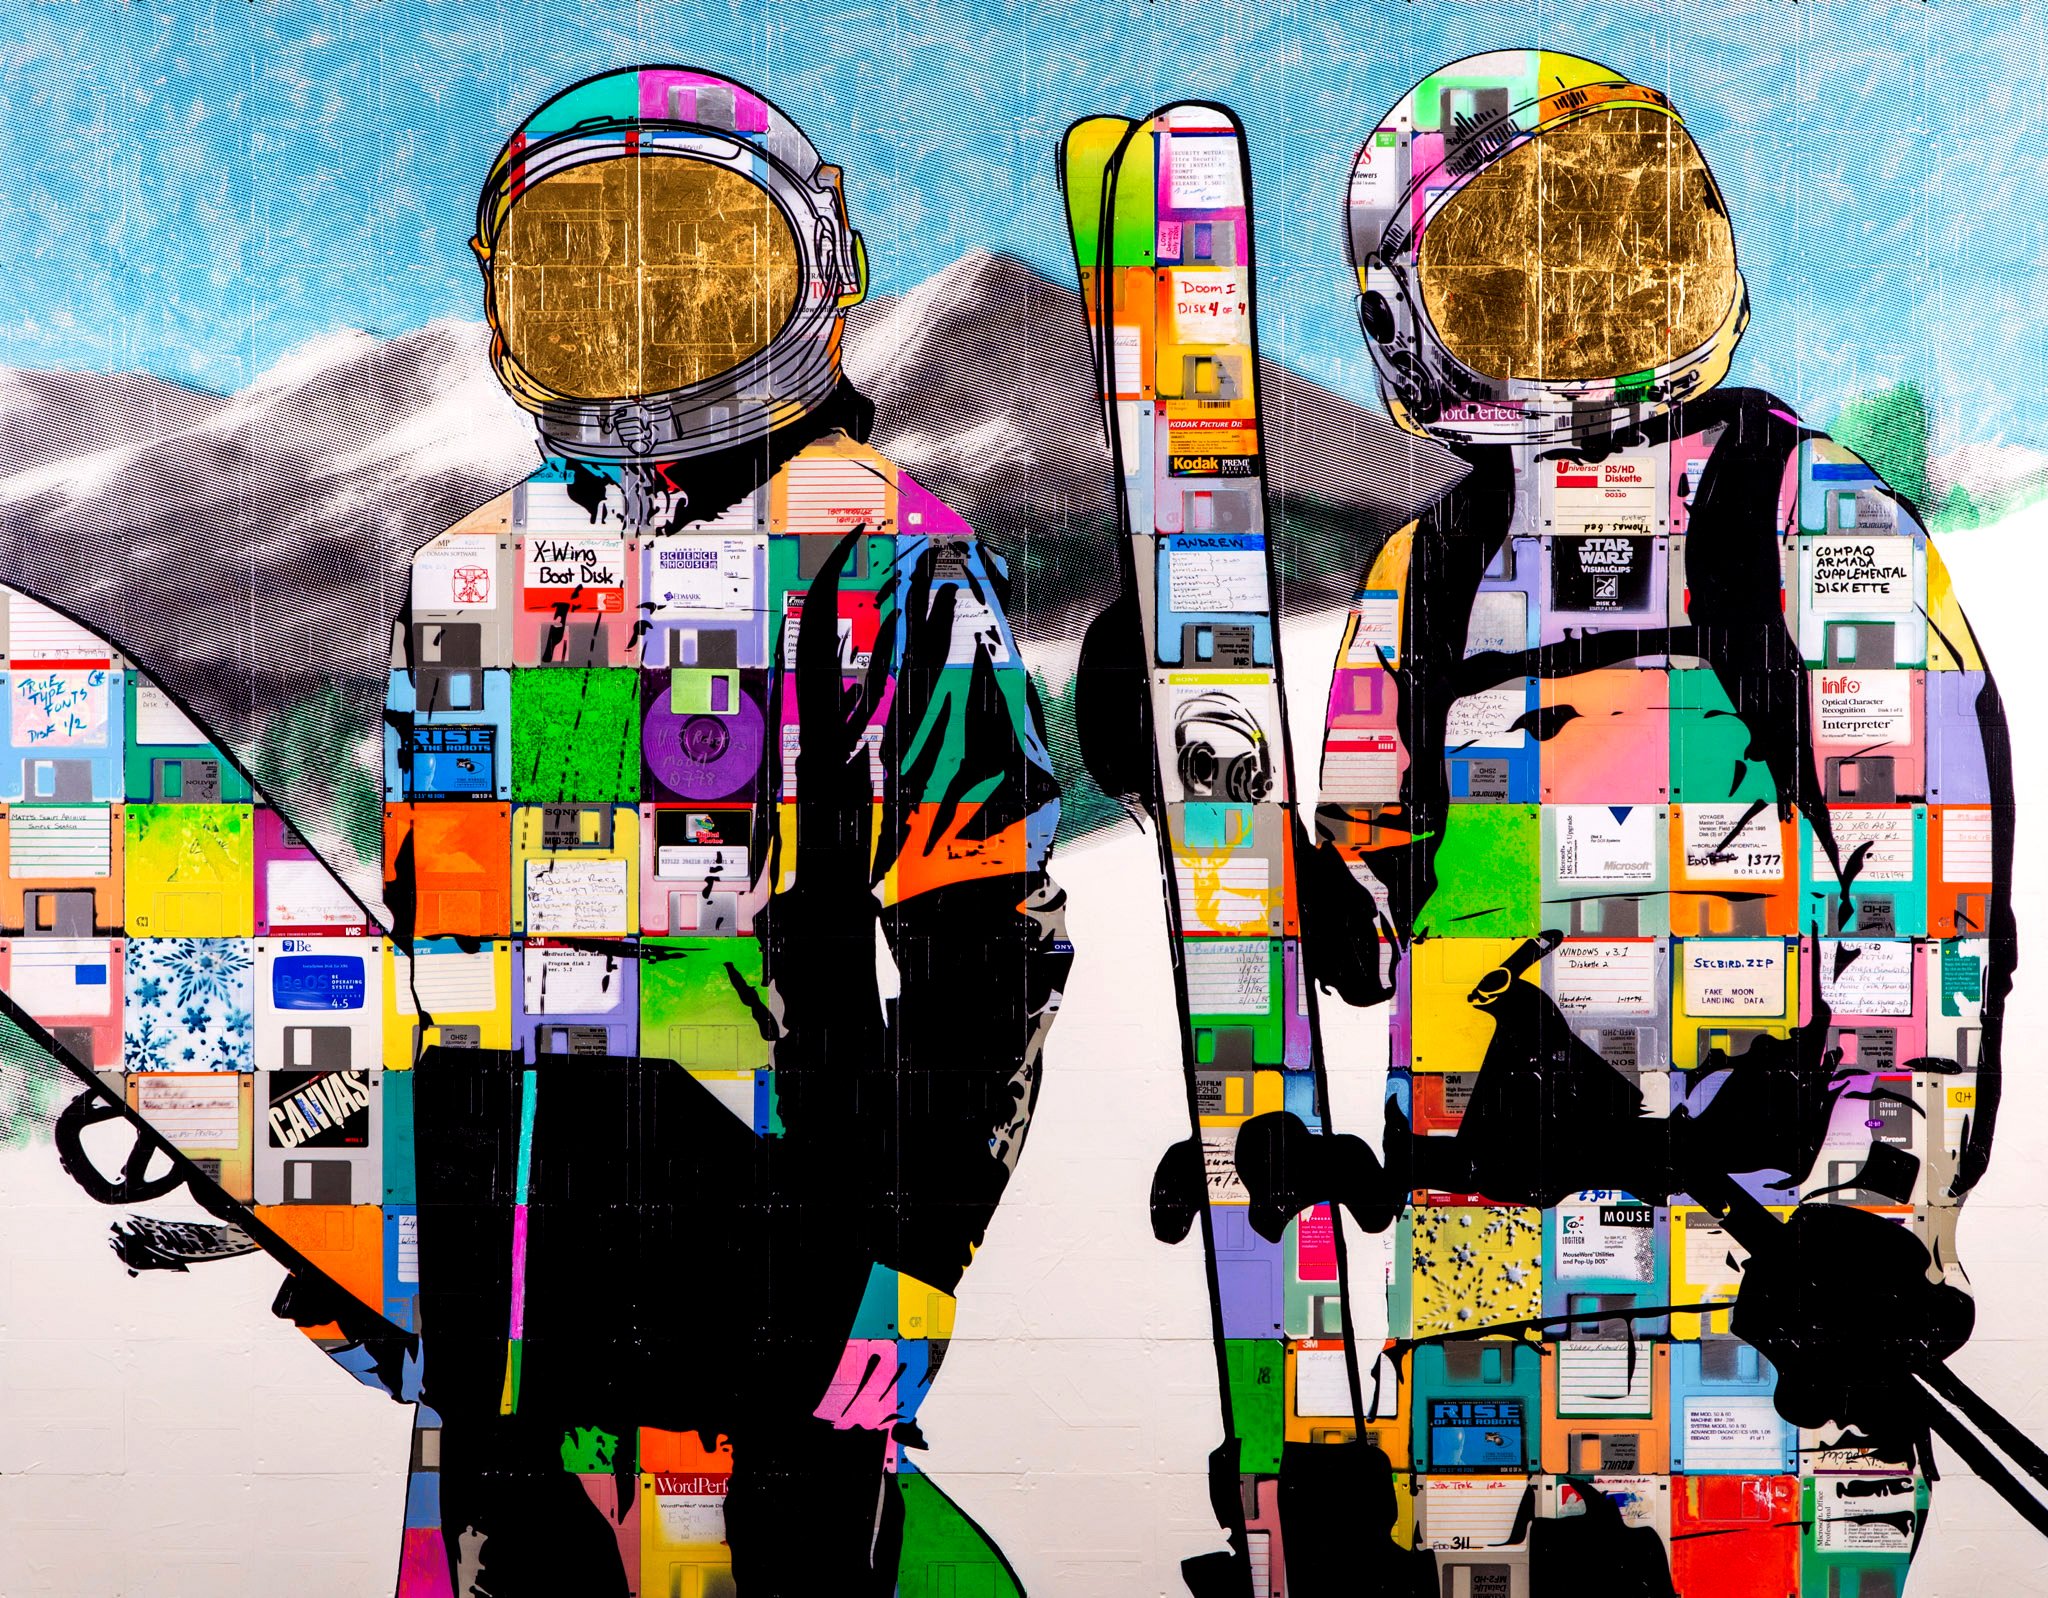 "Celestial Freestyle v2.0" snow ski astronauts painting on recycled computer floppy disks